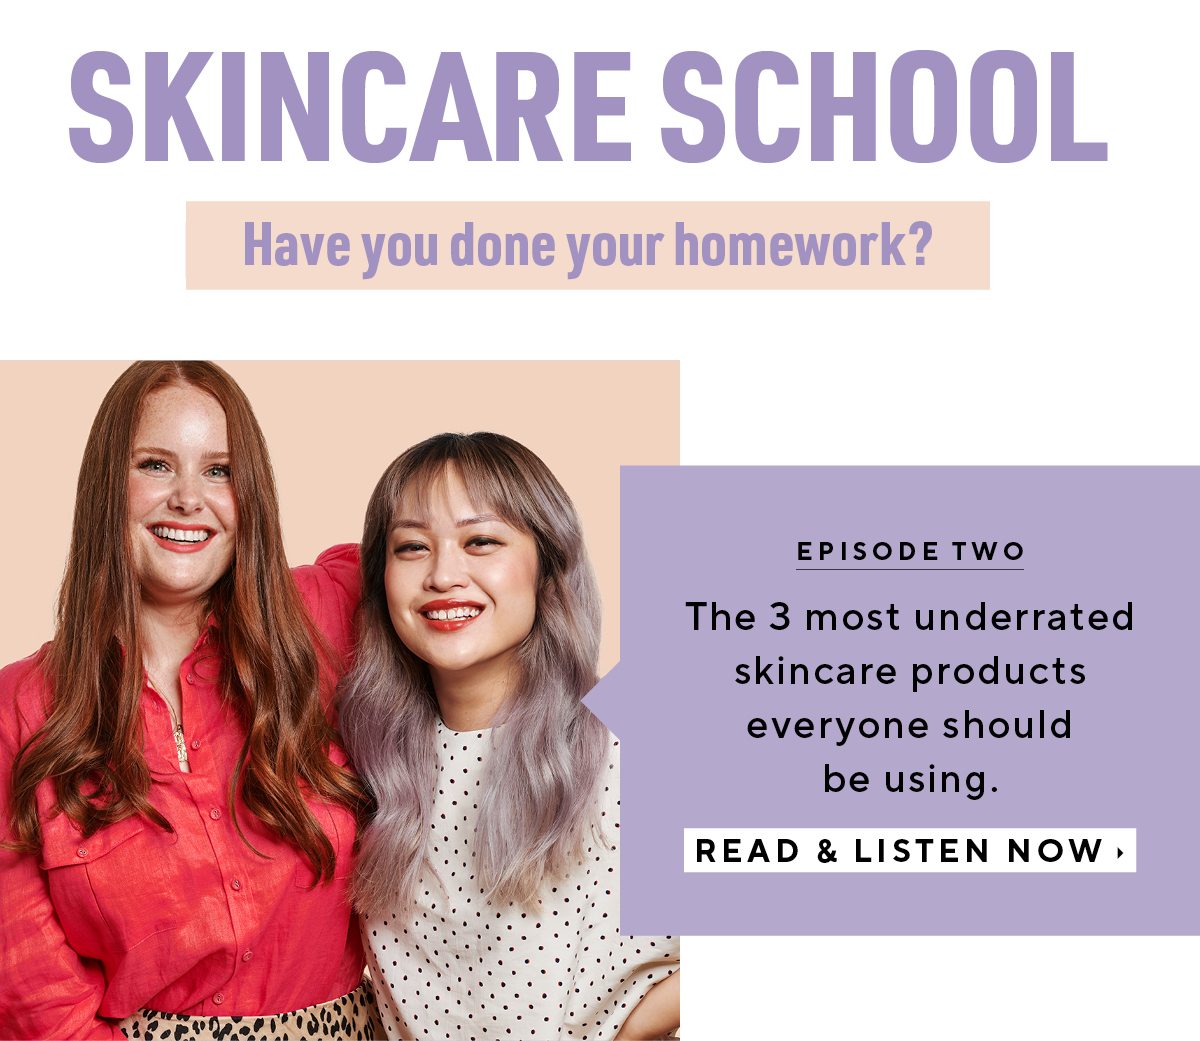 Skincare School episode two | The 3 most underrated skincare products everyone should be using.